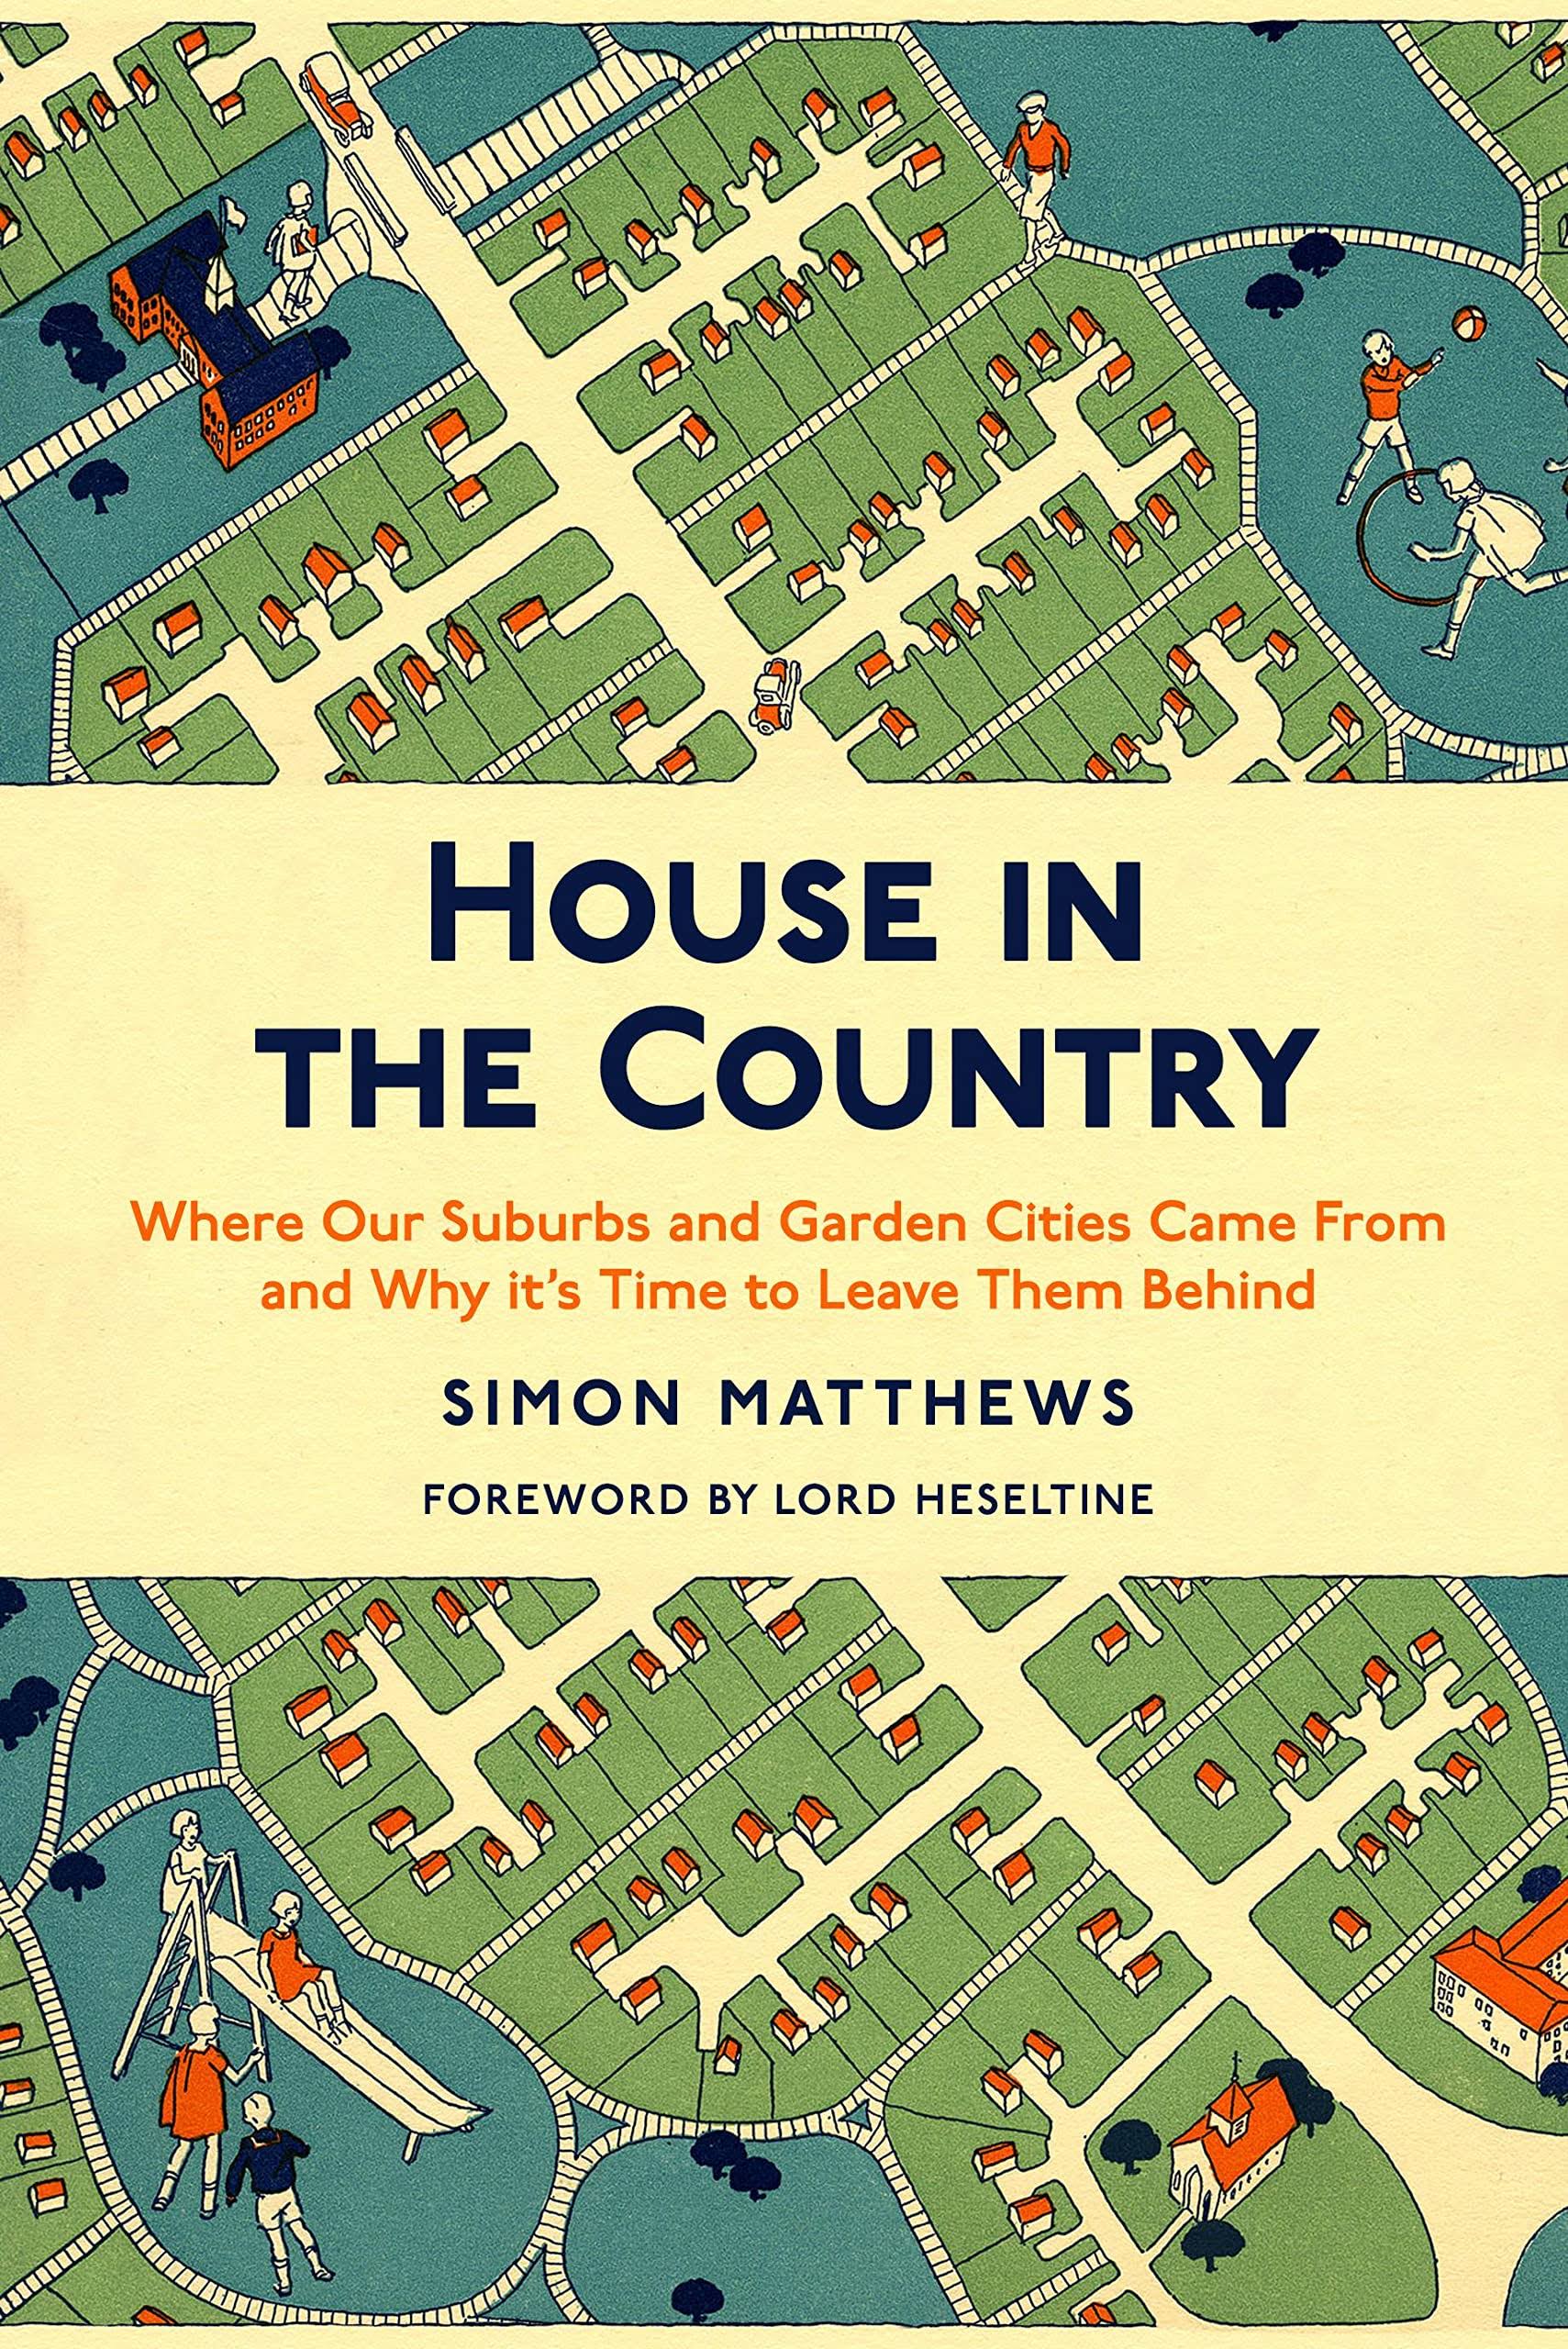 House in the Country by Simon Matthews